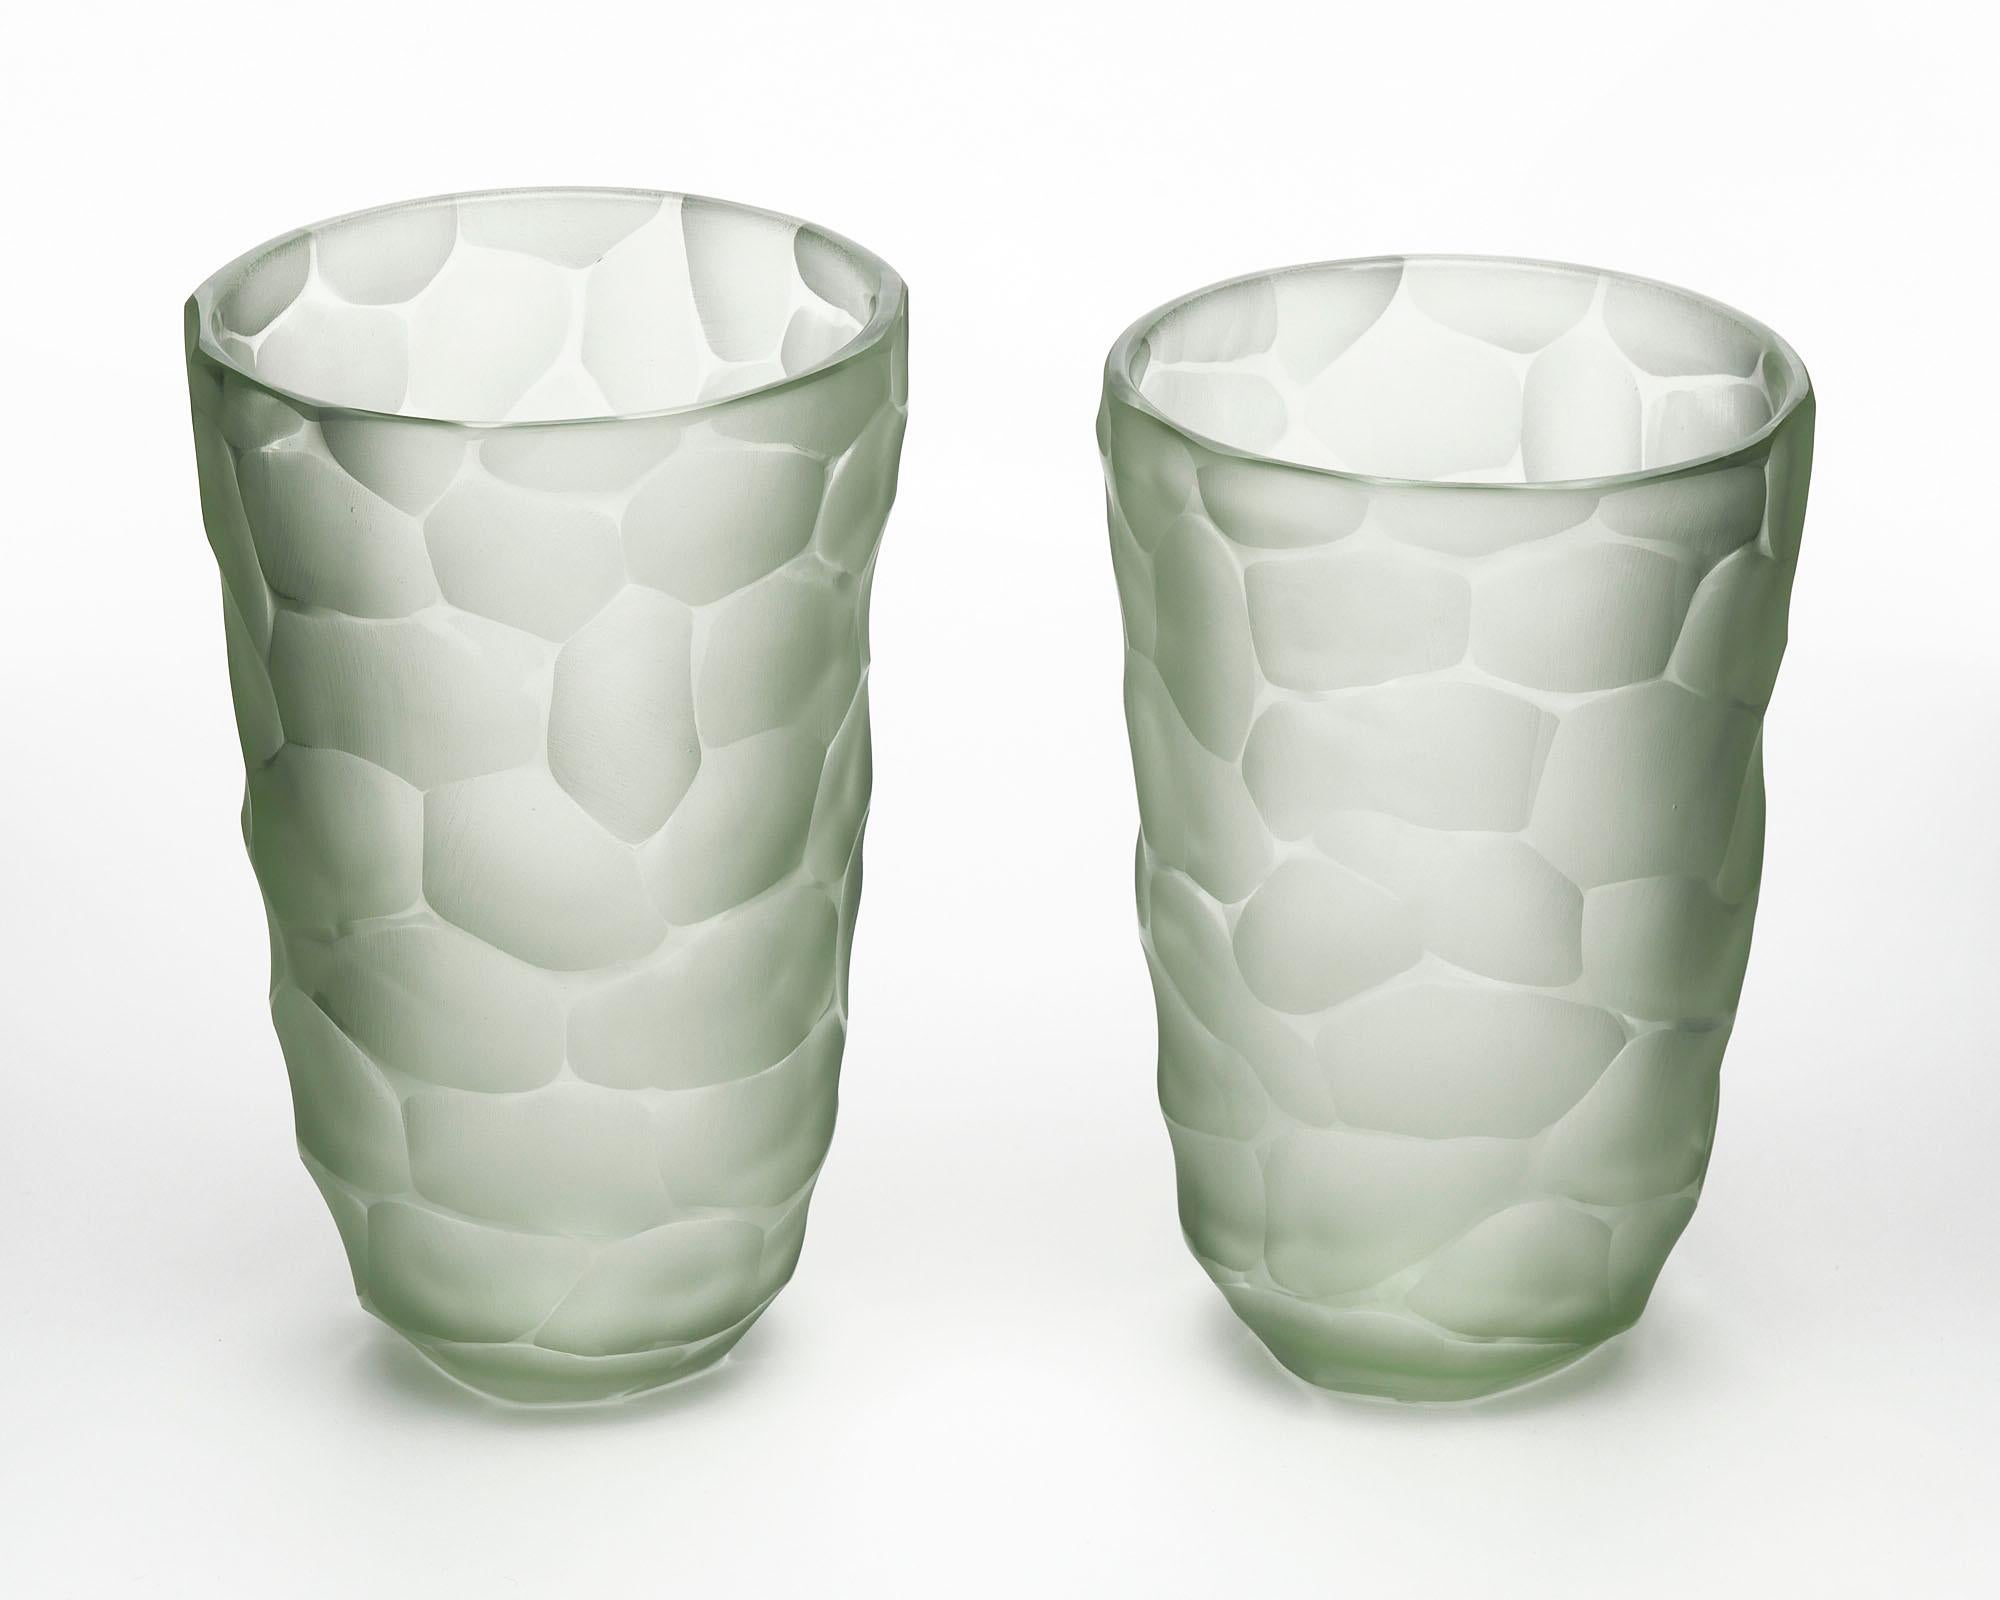 A pair of vases made of hand-blown glass from the Island of Murano outside of Venice, Italy. This pair has a light sea glass color and are made using the 